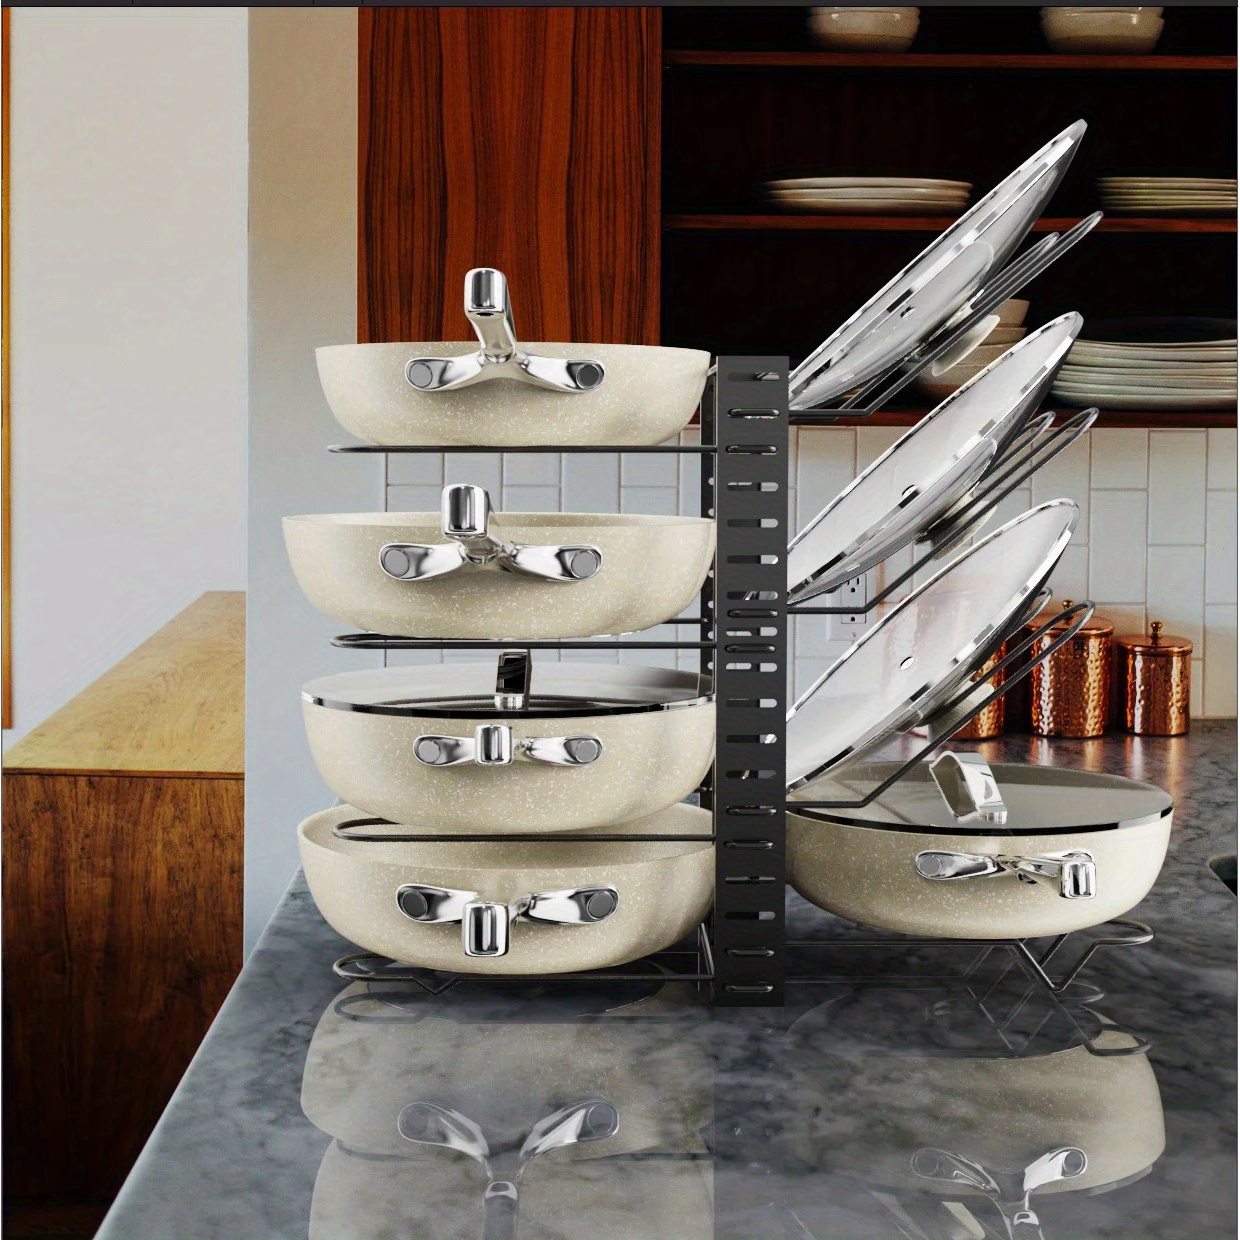 

Pots And Pans Rack Under Cabinet, Pots And Lids Storage, Kitchen Cookware Sets Organizers And Storage, Adjustable Pan Rack Organizer